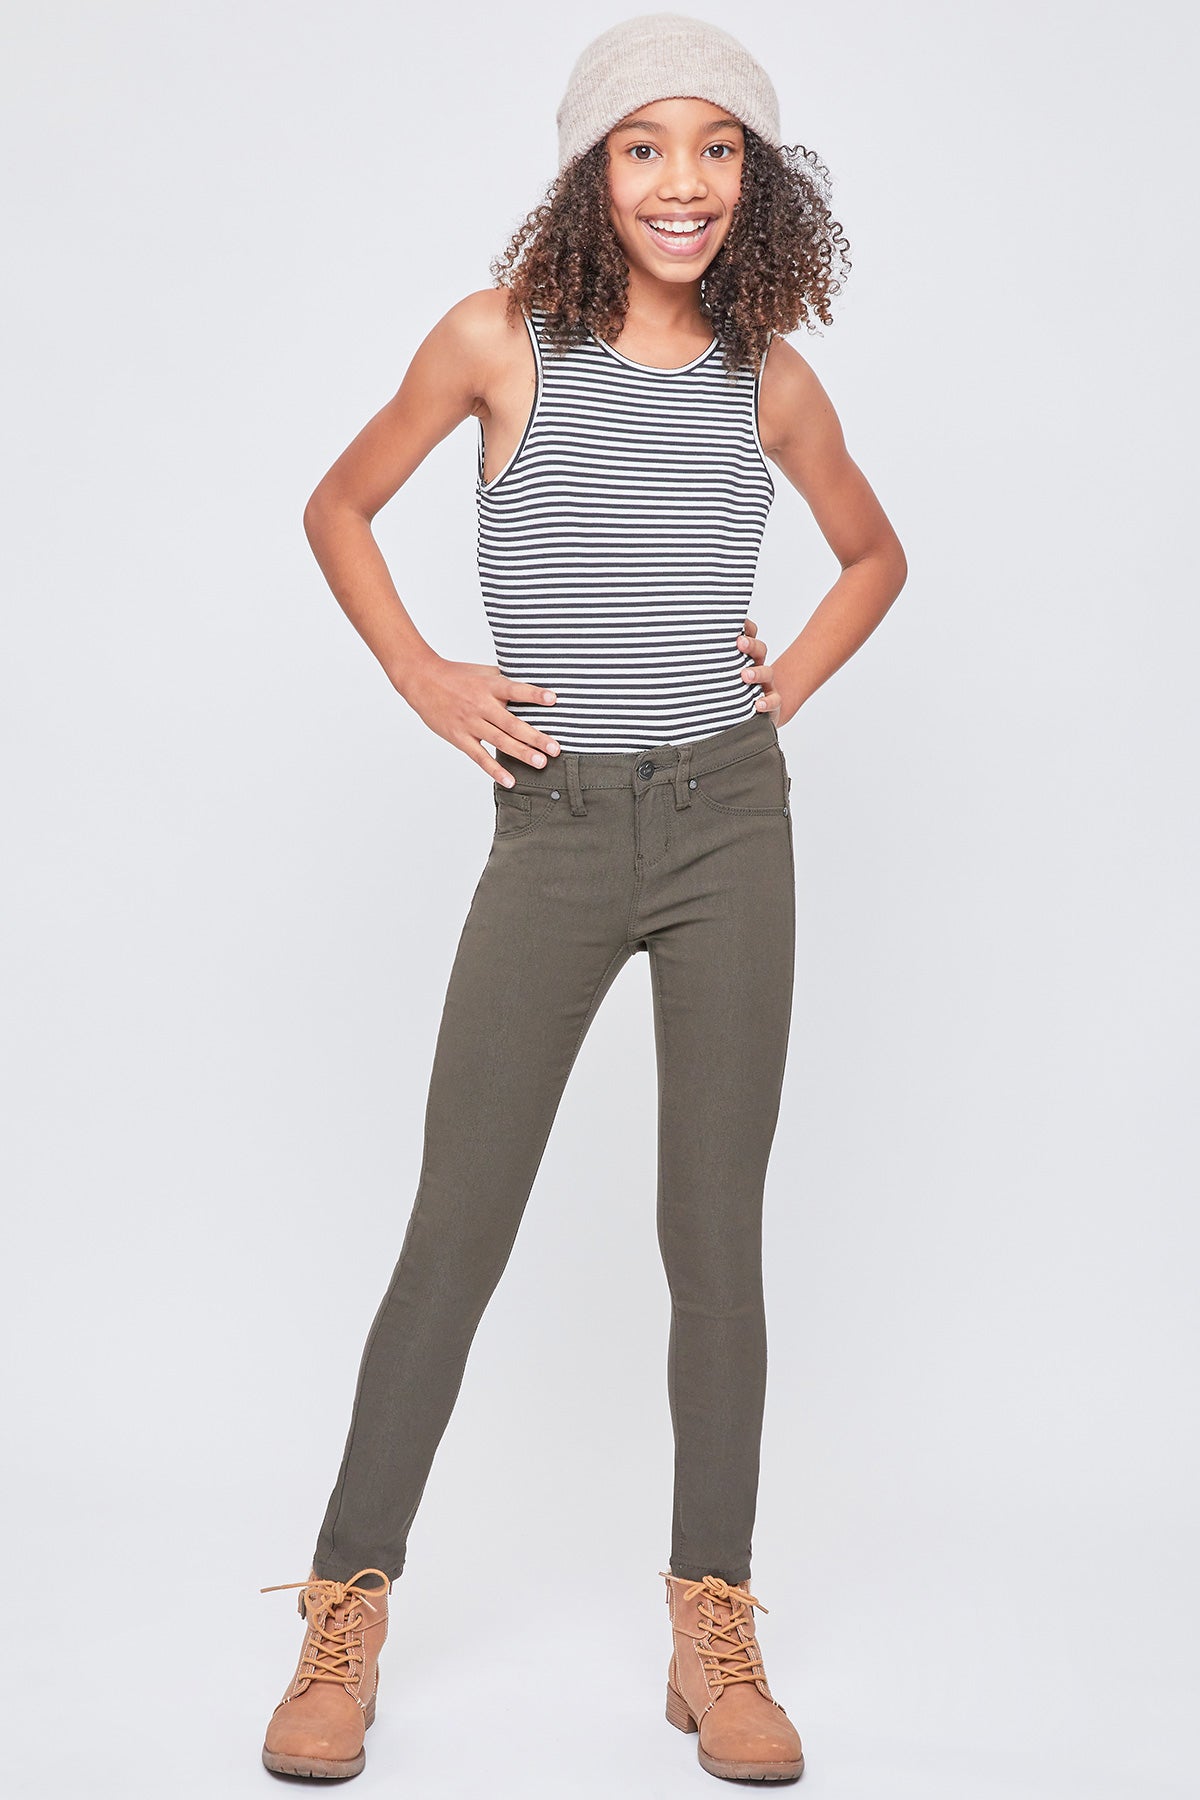 Buy The Children's Place Girls Girls Green Solid Capri Jeans - NNNOW.com